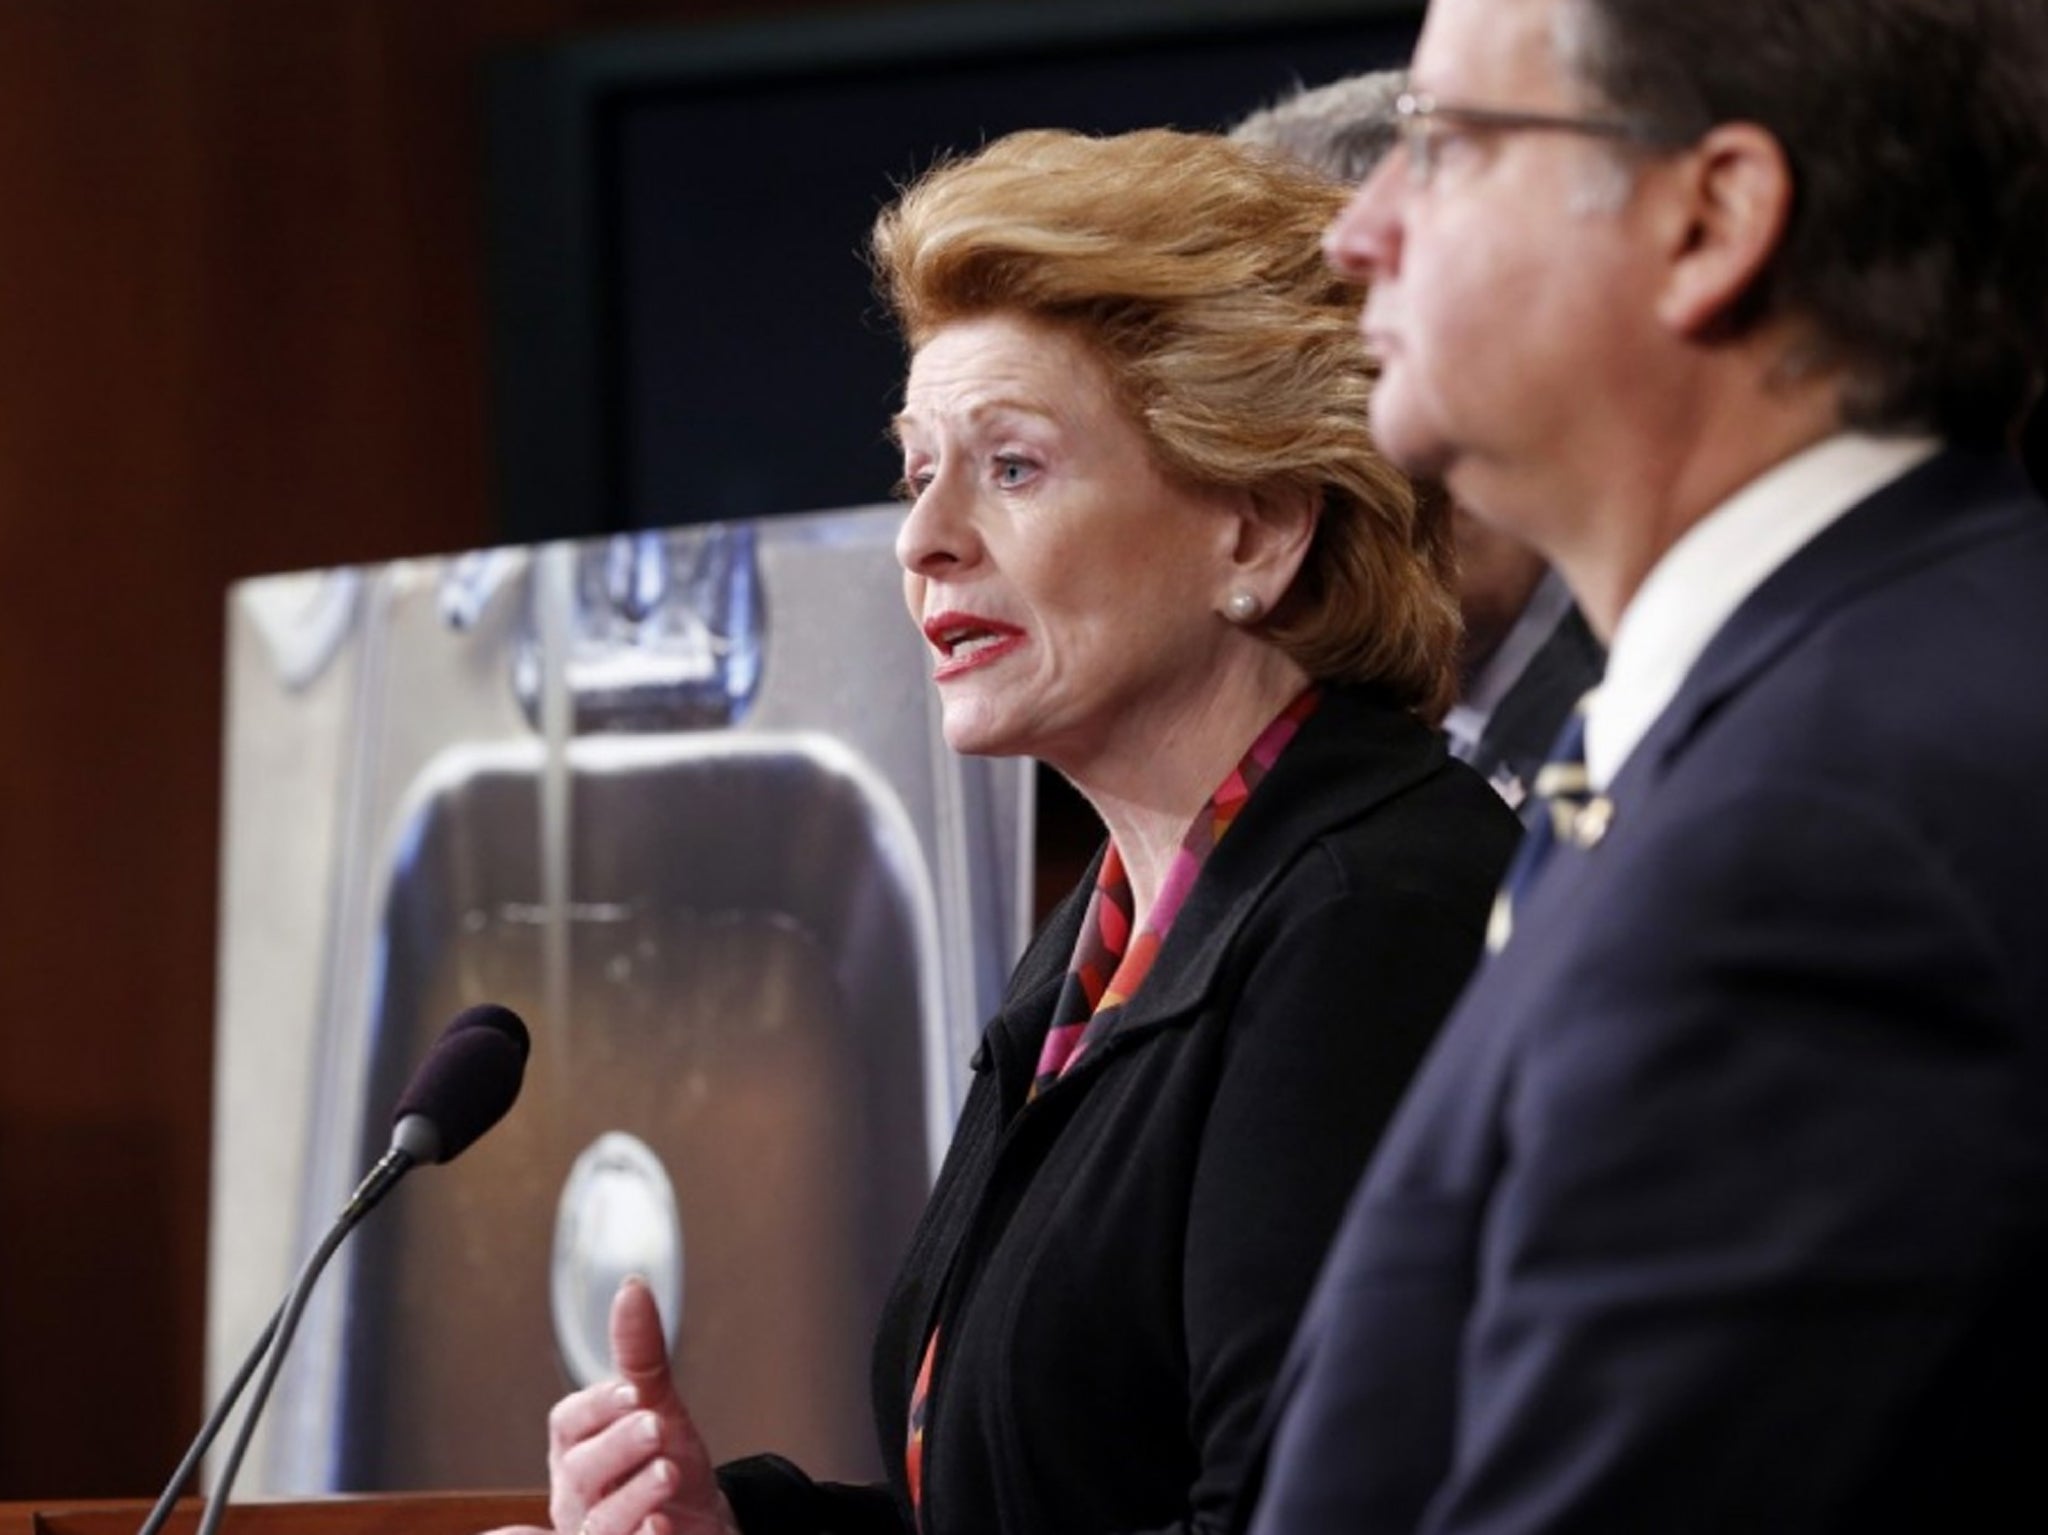 Sen. Debbie Stabenow, D-Mich., left, accompanied by Sen. Gary Peters, D-Mich., and others discusses proposed legislation to help Flint, Mich. with their current water crisis, during a news conference, Thursday, Jan. 28, 2016, on Capitol Hill in Washington